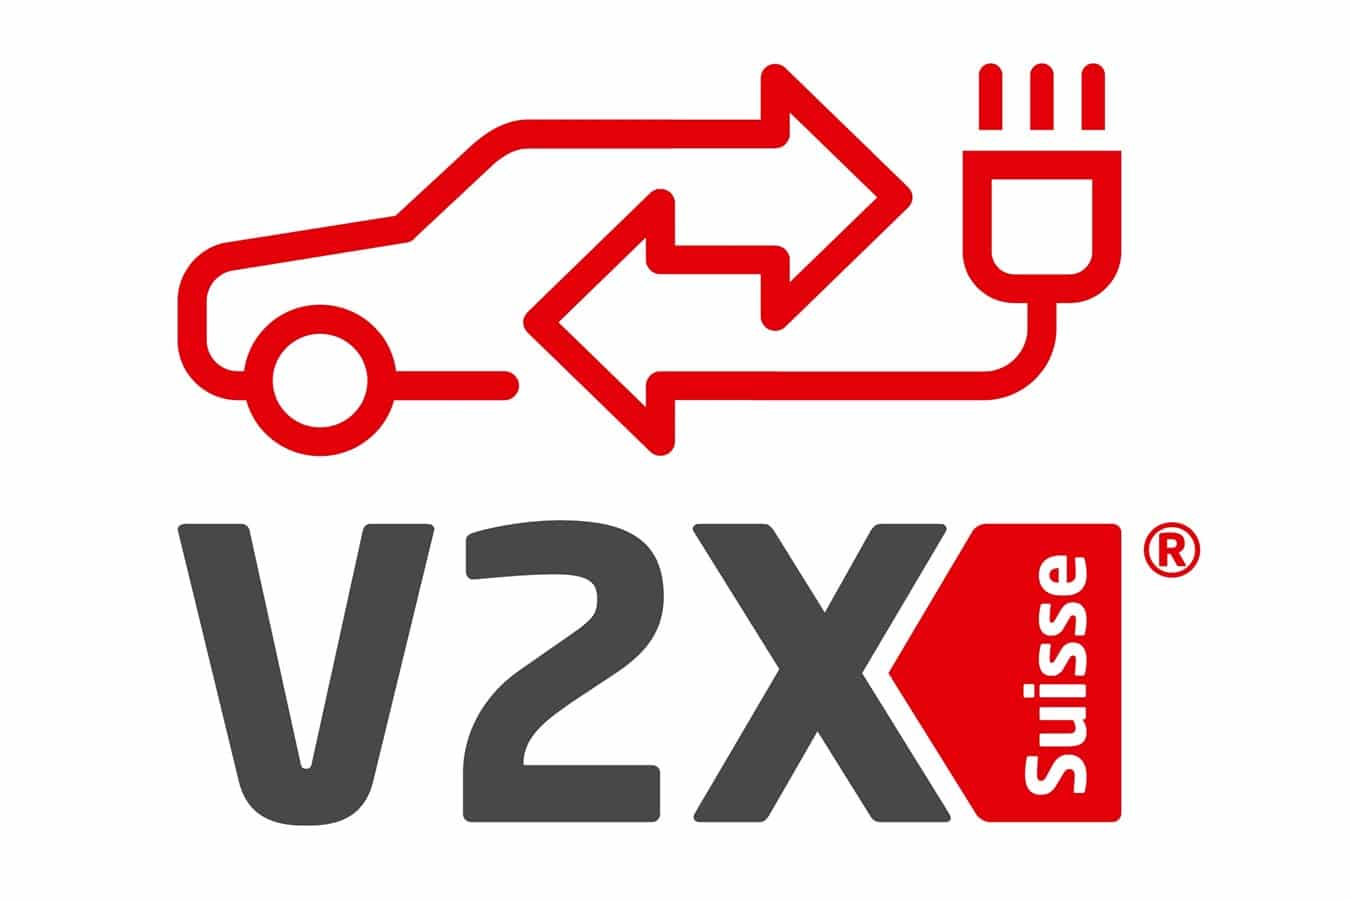 Honda and V2X Suisse Consortium to Advance Vehicle-to-Grid Charging Technology in Switzerland